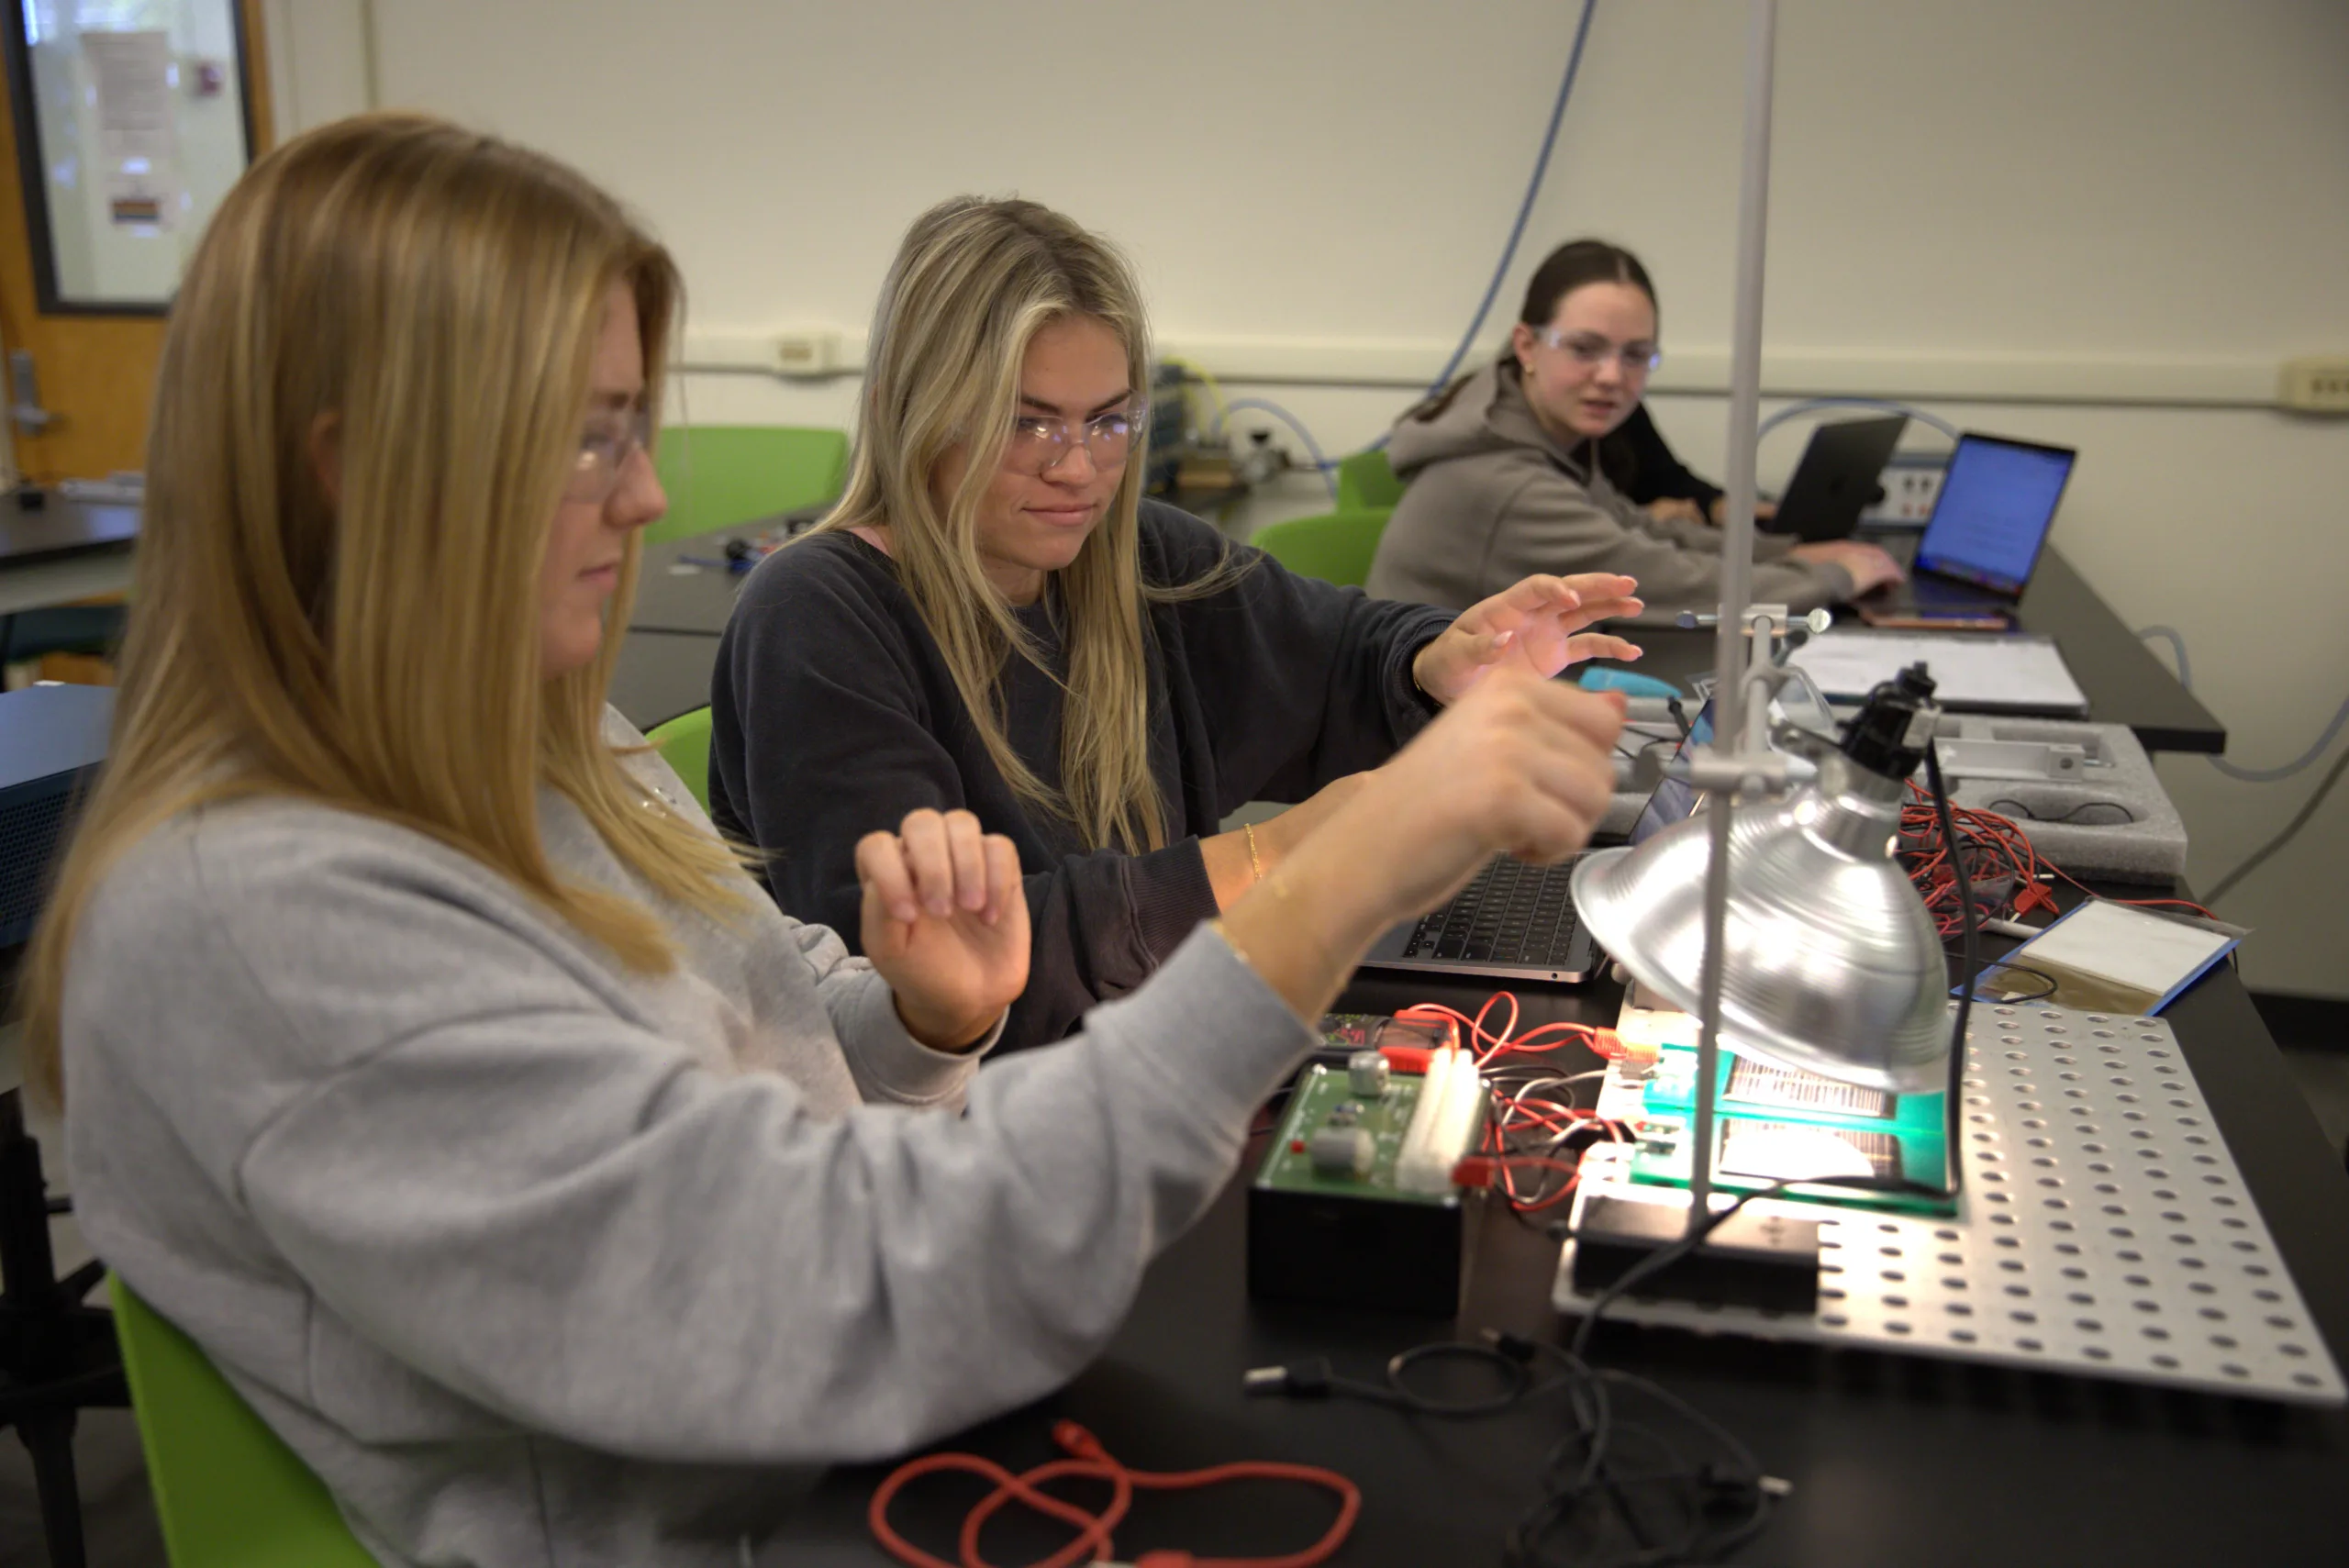 Students work with electrical wires in a lab